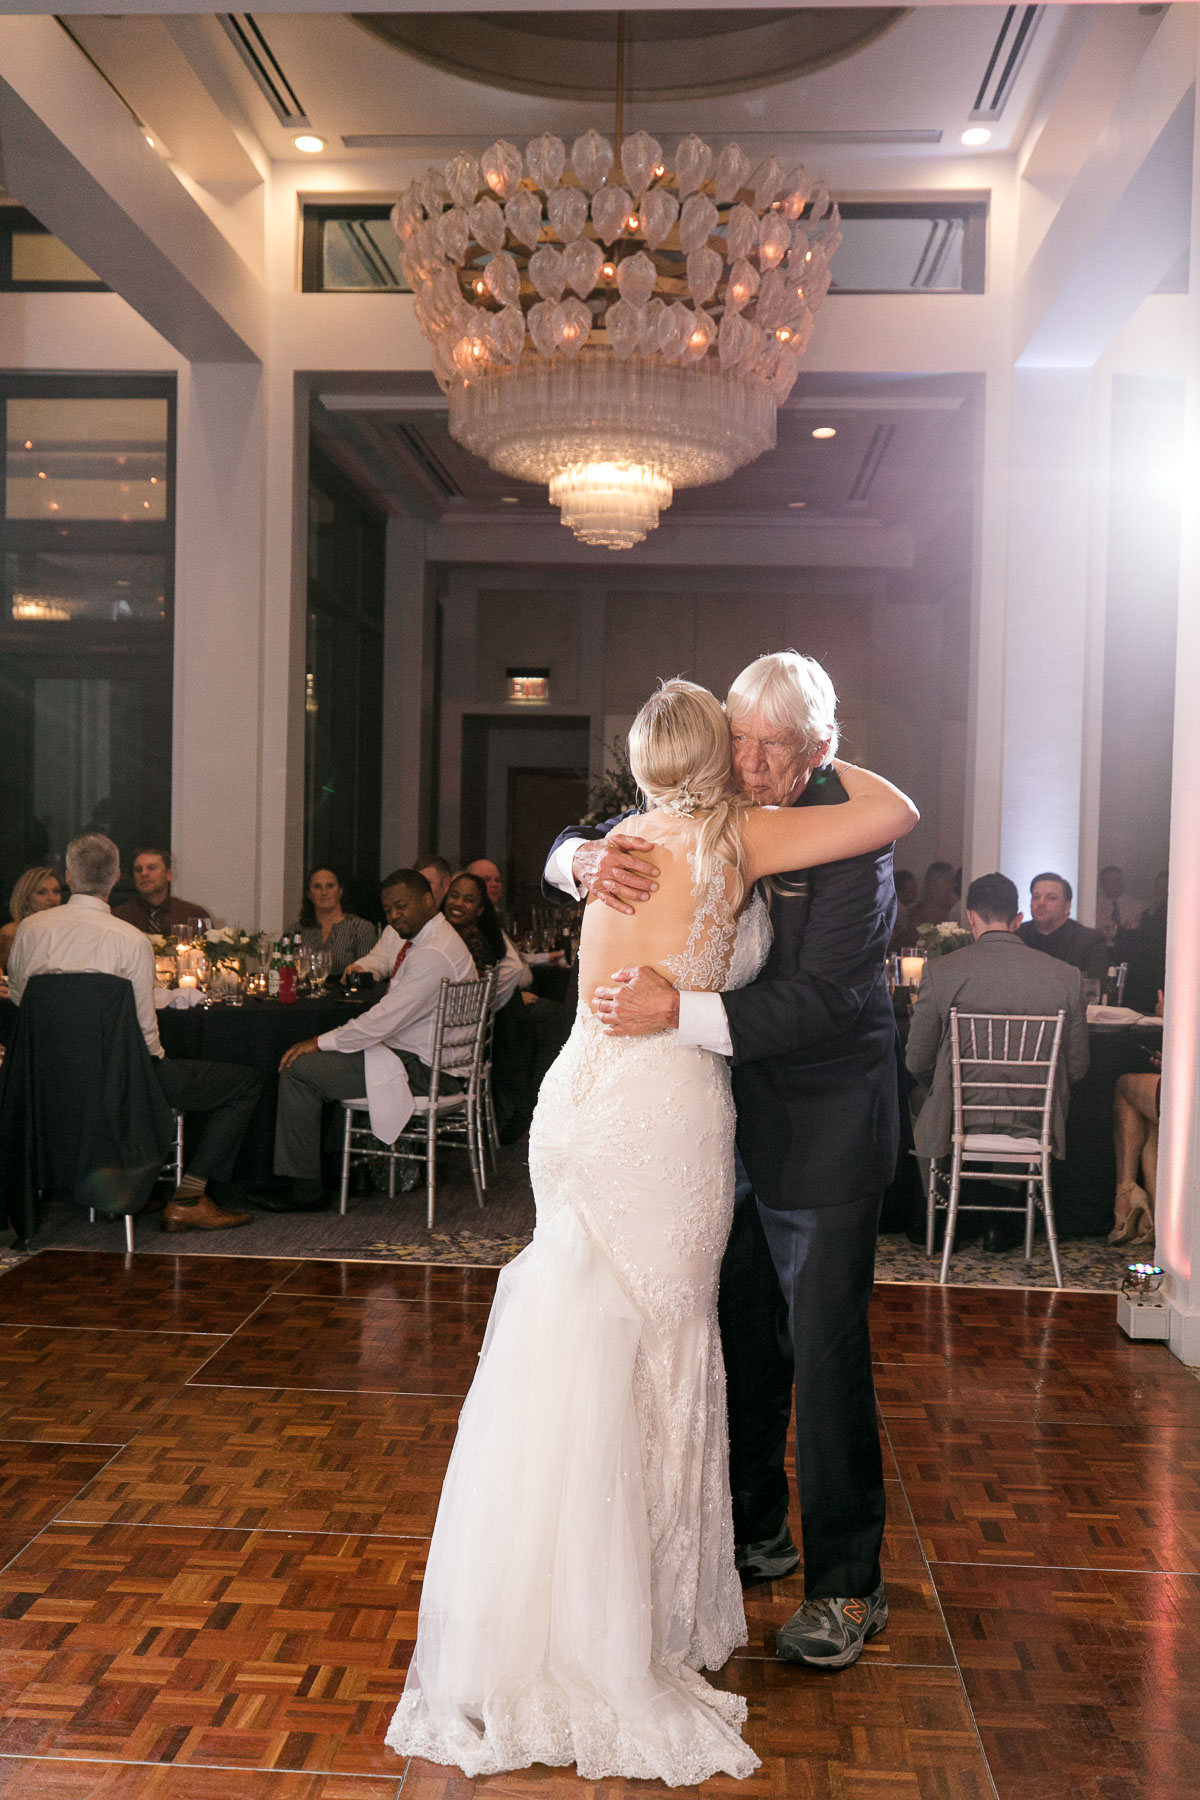 Bride and her father dance at wedding